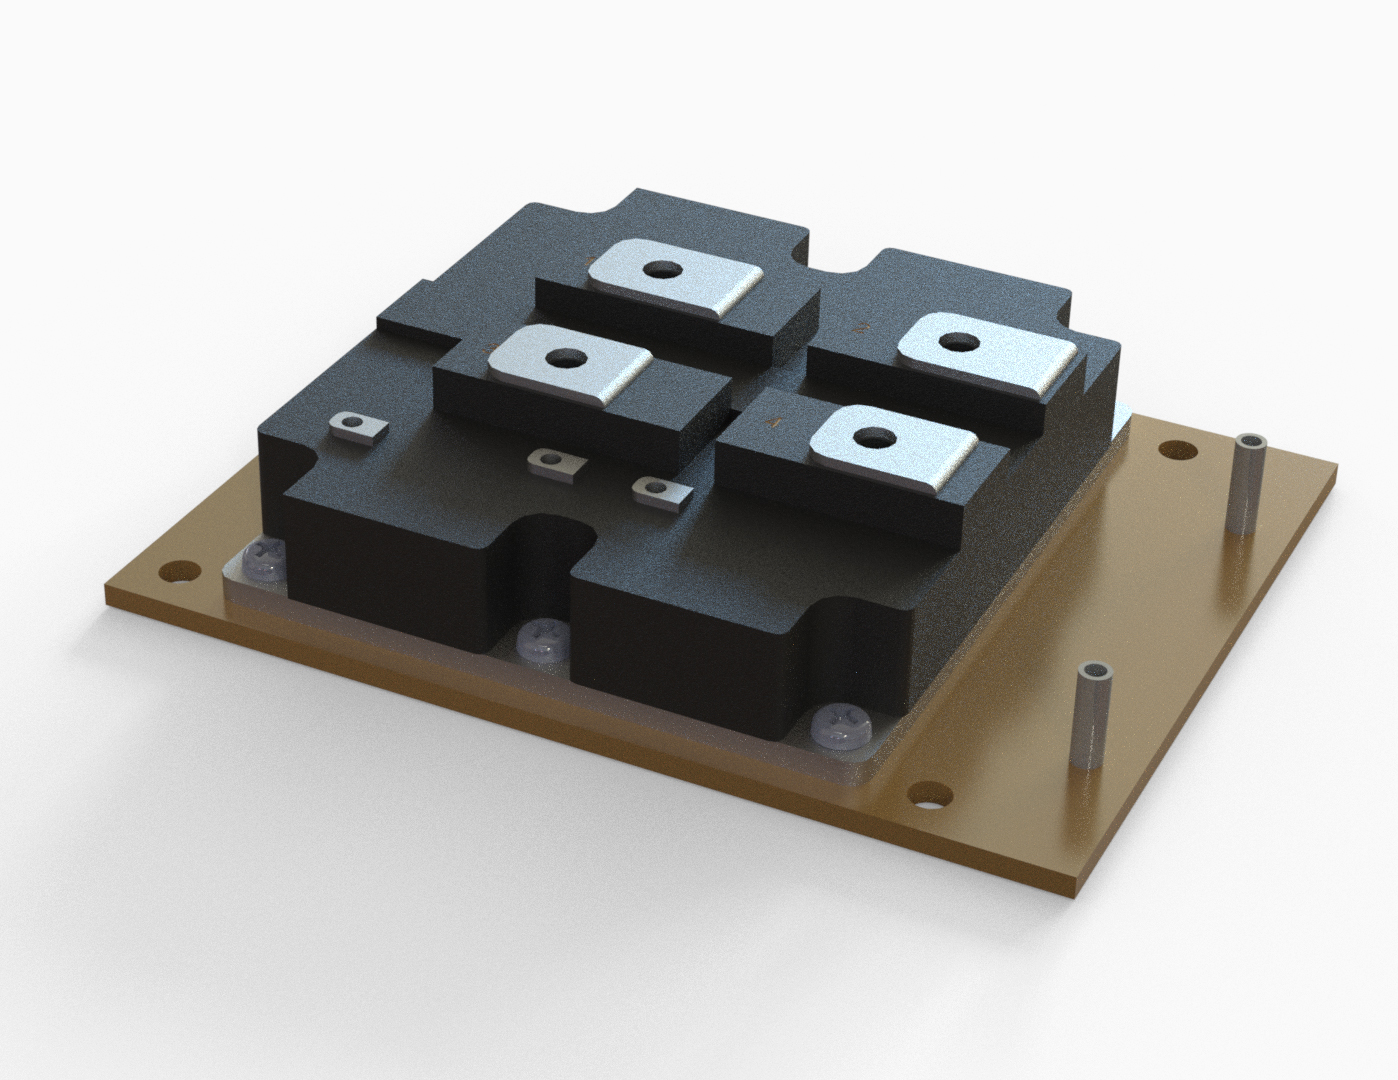 Union Cooling Tech™<br />
Liquid-cooling module for IGBT